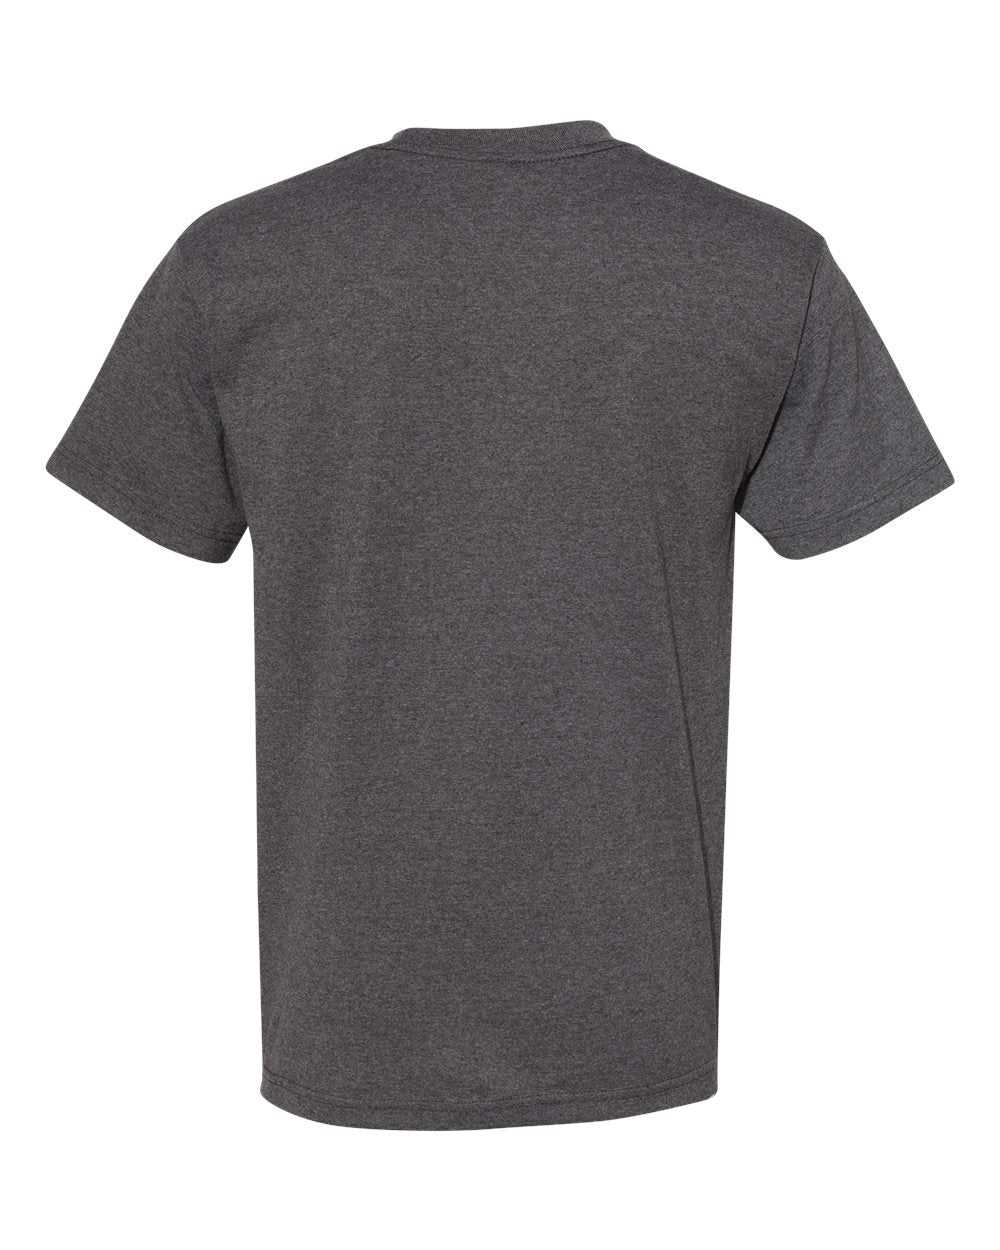 American Apparel 1301 Unisex Heavyweight Cotton T-Shirt - Charcoal Heather - HIT a Double